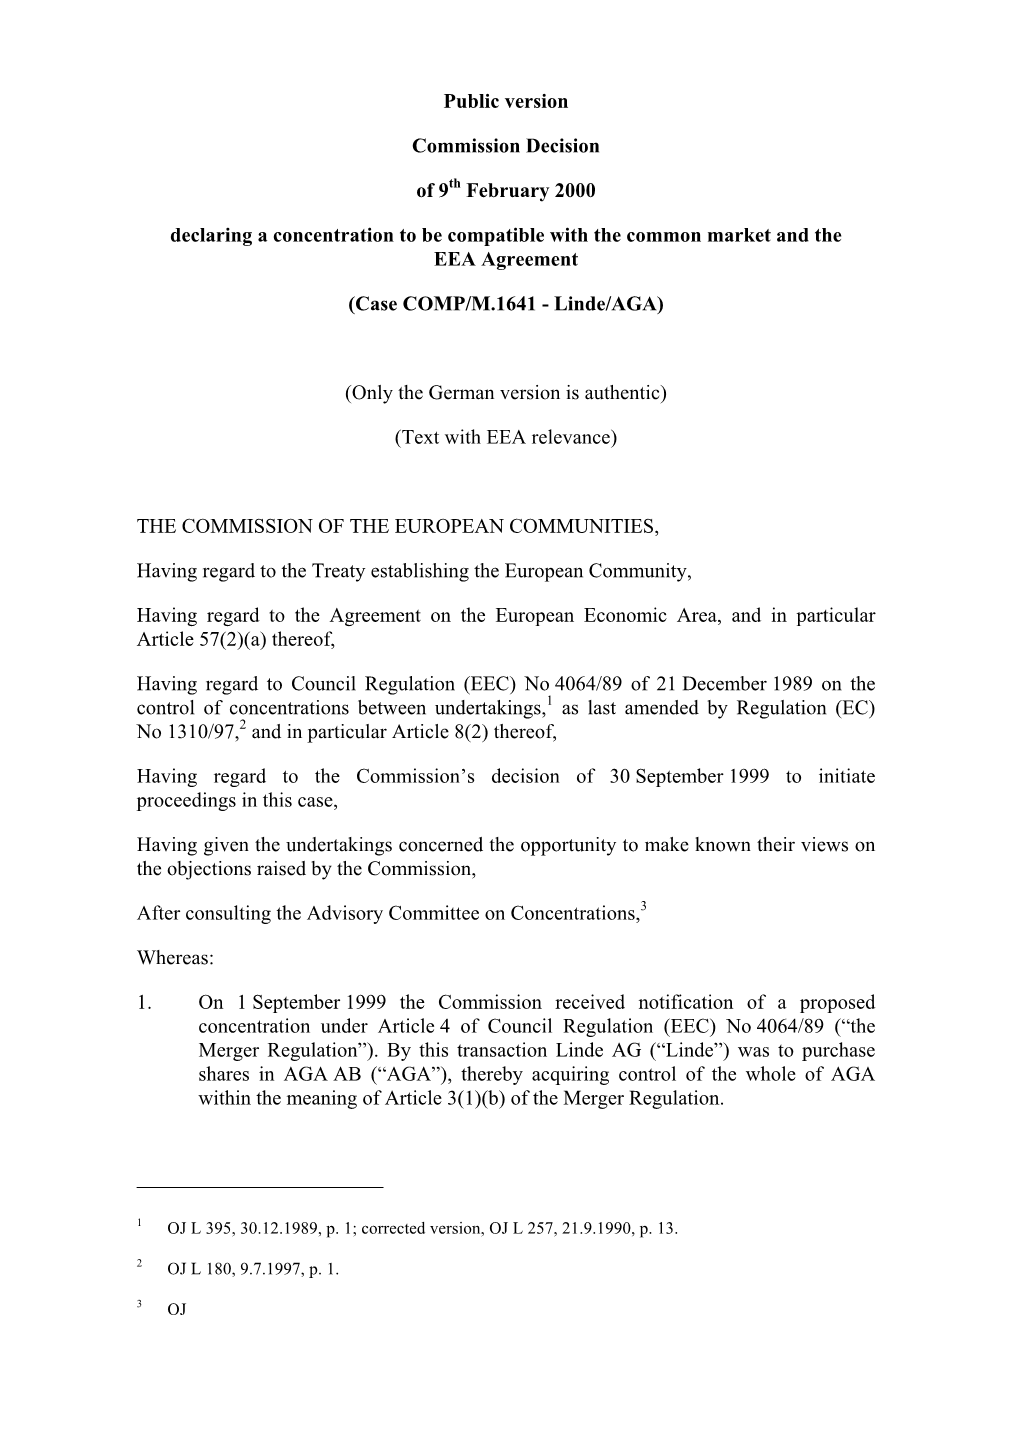 Public Version Commission Decision of 9Th February 2000 Declaring A